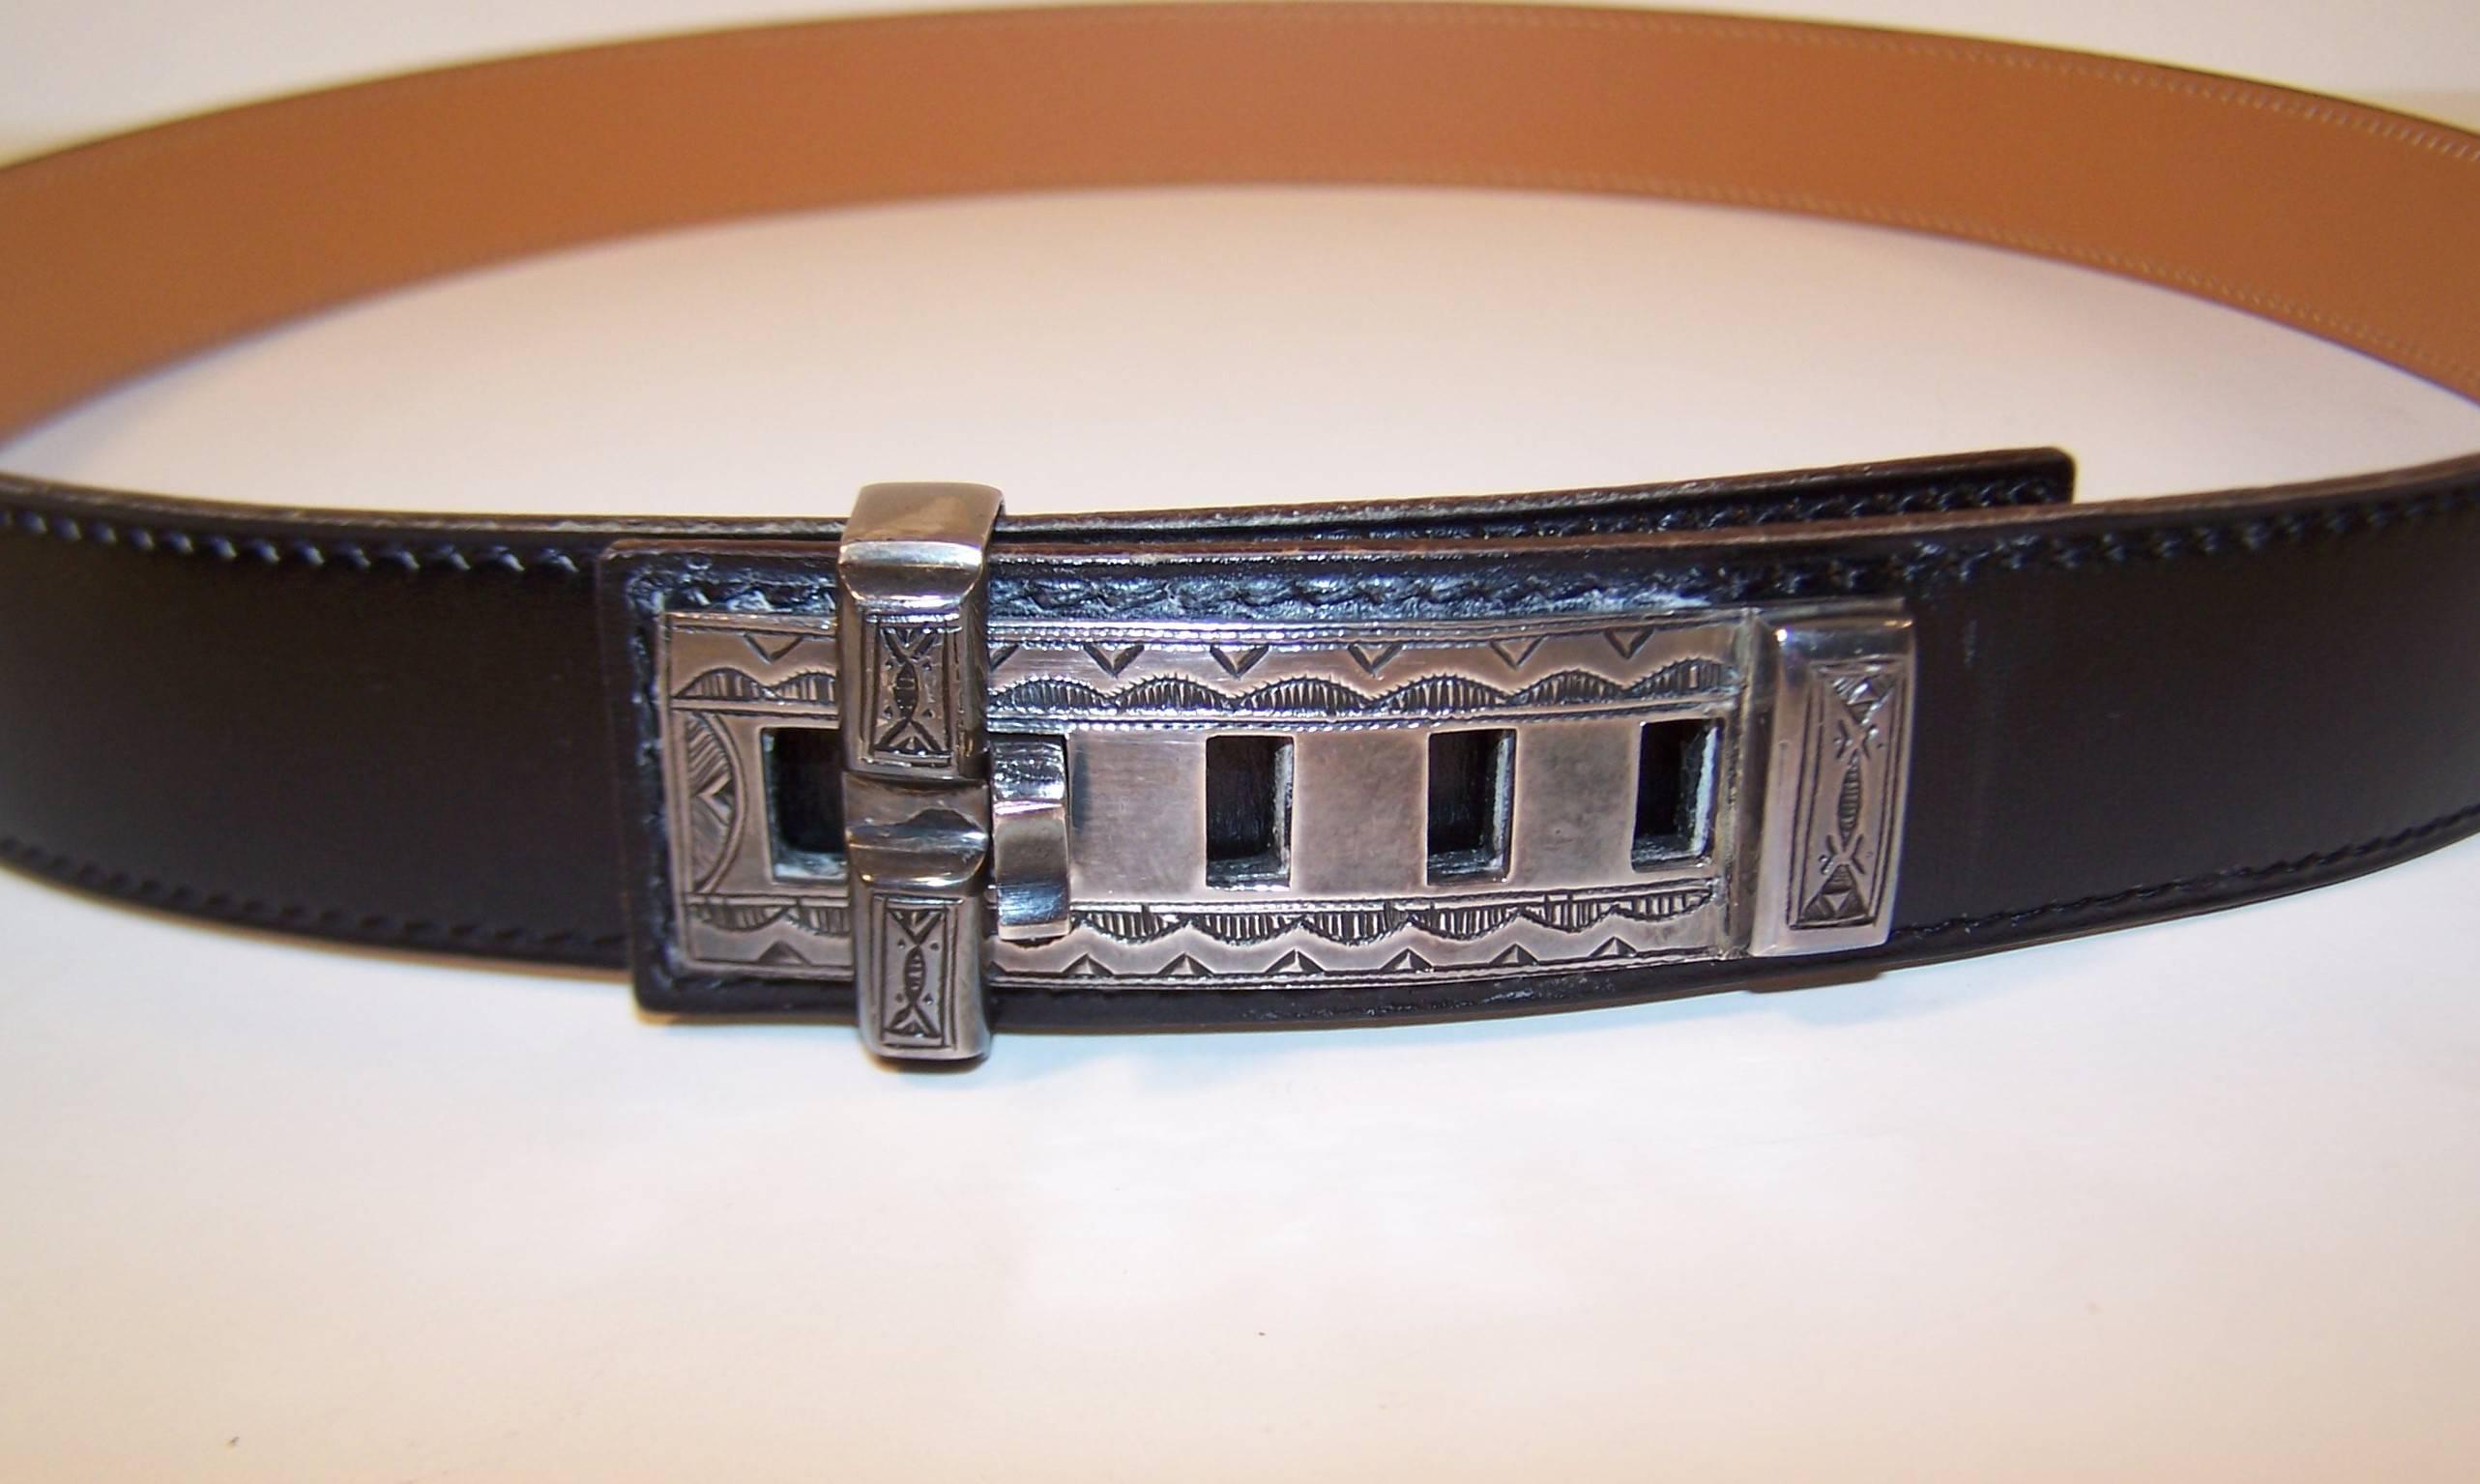 This unique Hermes 'Touareg' black leather belt features a hand crafted sterling silver buckle with a North African tribal motif.  The closure is a 'collier de chien' style with five adjustments and a sliding bar to keep everything in place.  The